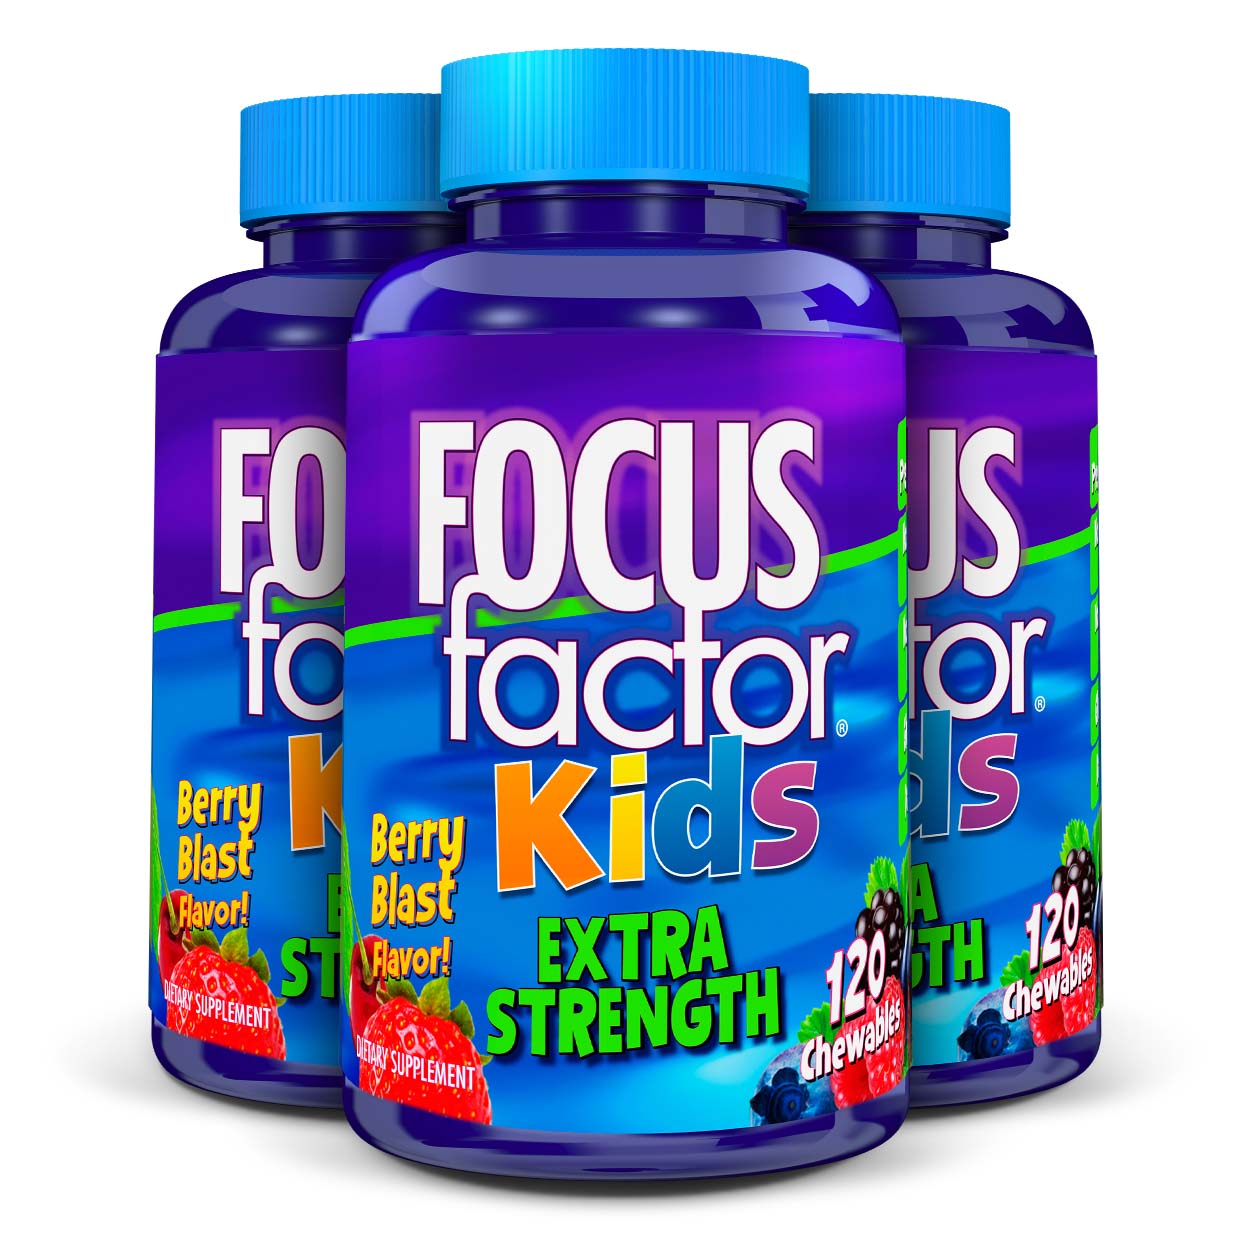 Mental focus supplements for youth